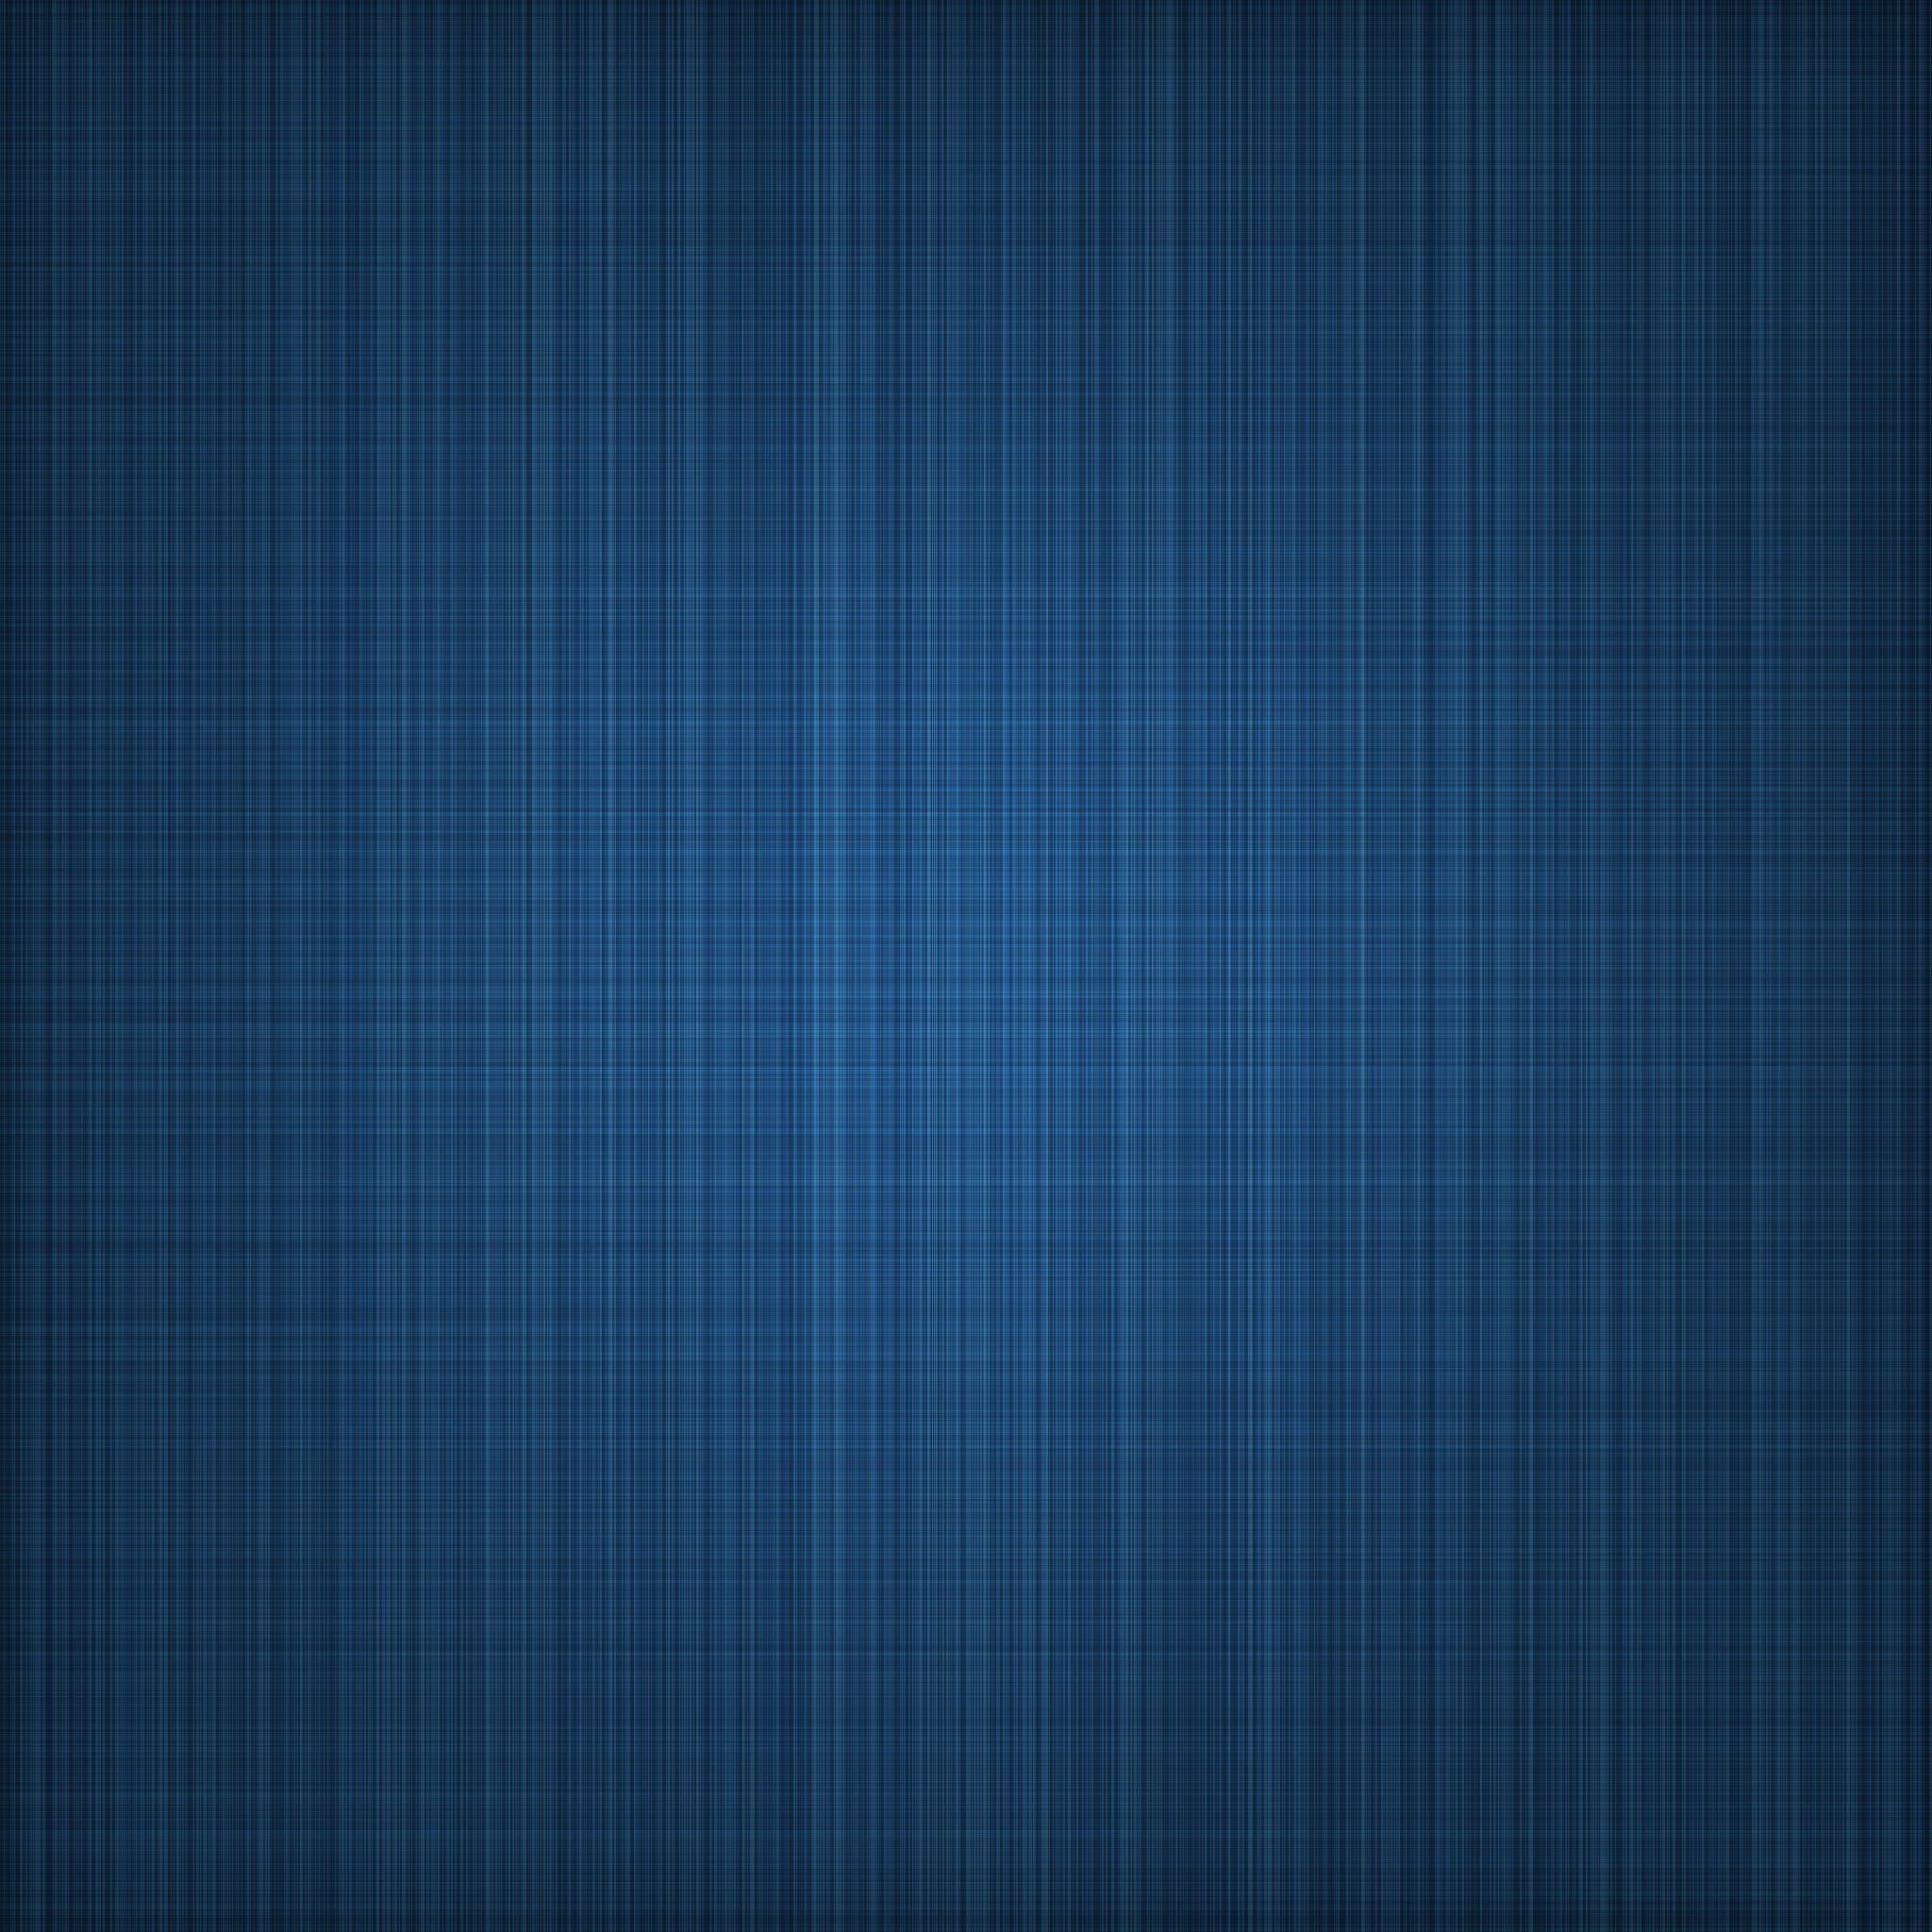 iPad Air Wallpaper in High Definition For Free Download